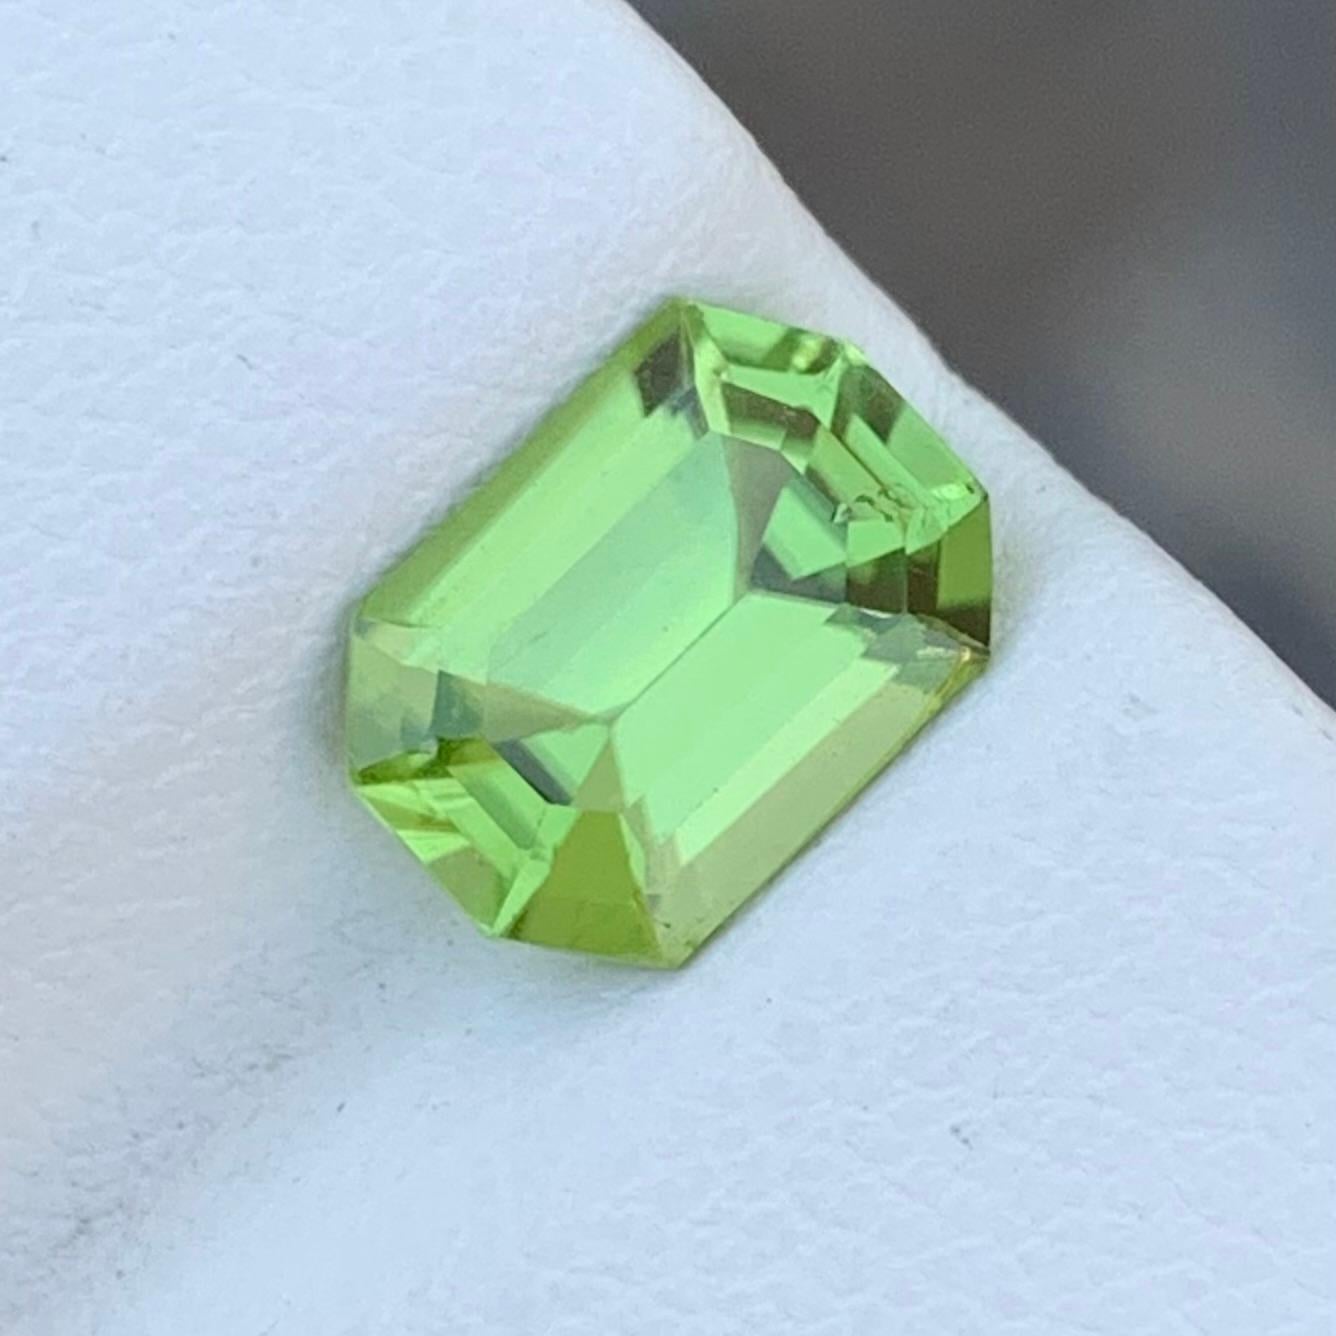 Loose Peridot
Weight: 2.10 Carats
Dimension: 9.1 x 6.5 x 4.2 Mm
Colour: Green
Origin: Supat Valley, Pakistan
Shape: Octagon
Certificate: On Demand

Peridot, a vibrant and lustrous gemstone, has been cherished for centuries for its unique green hues